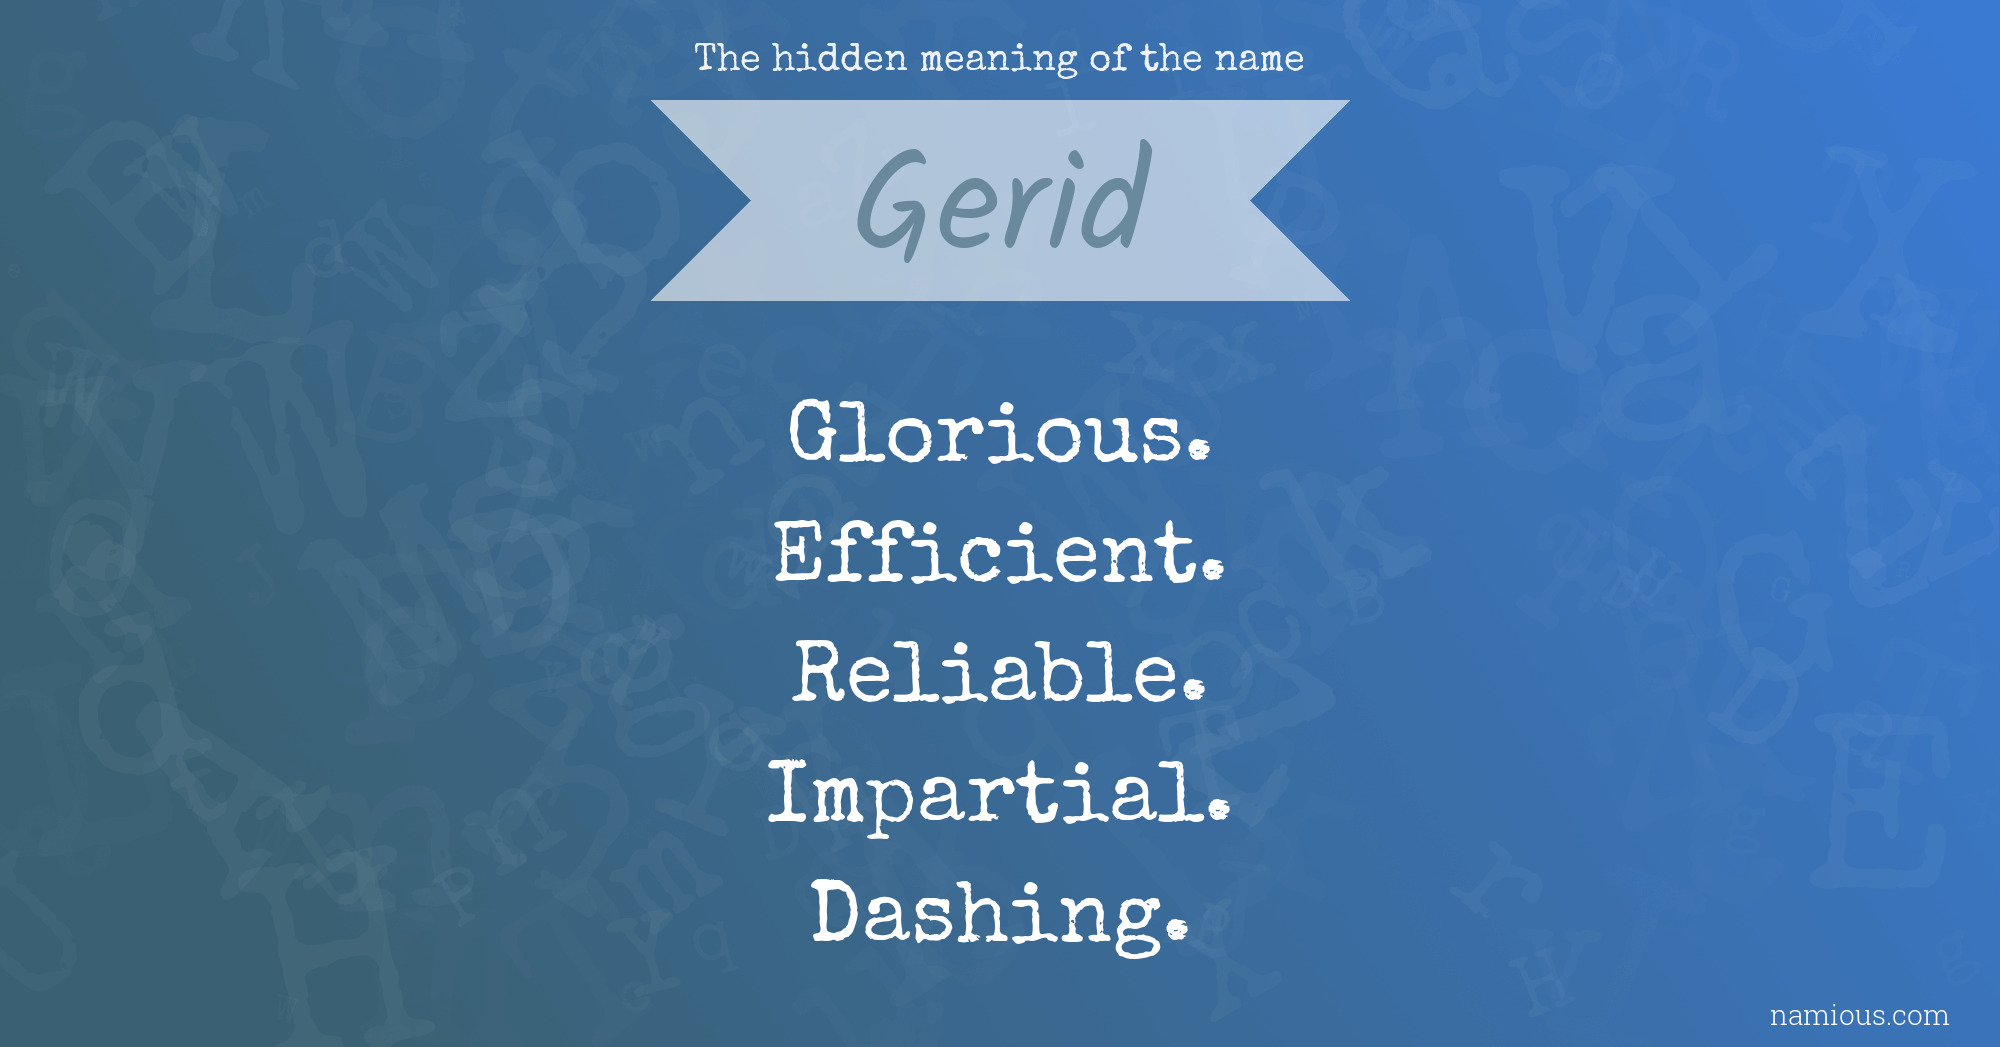 The hidden meaning of the name Gerid